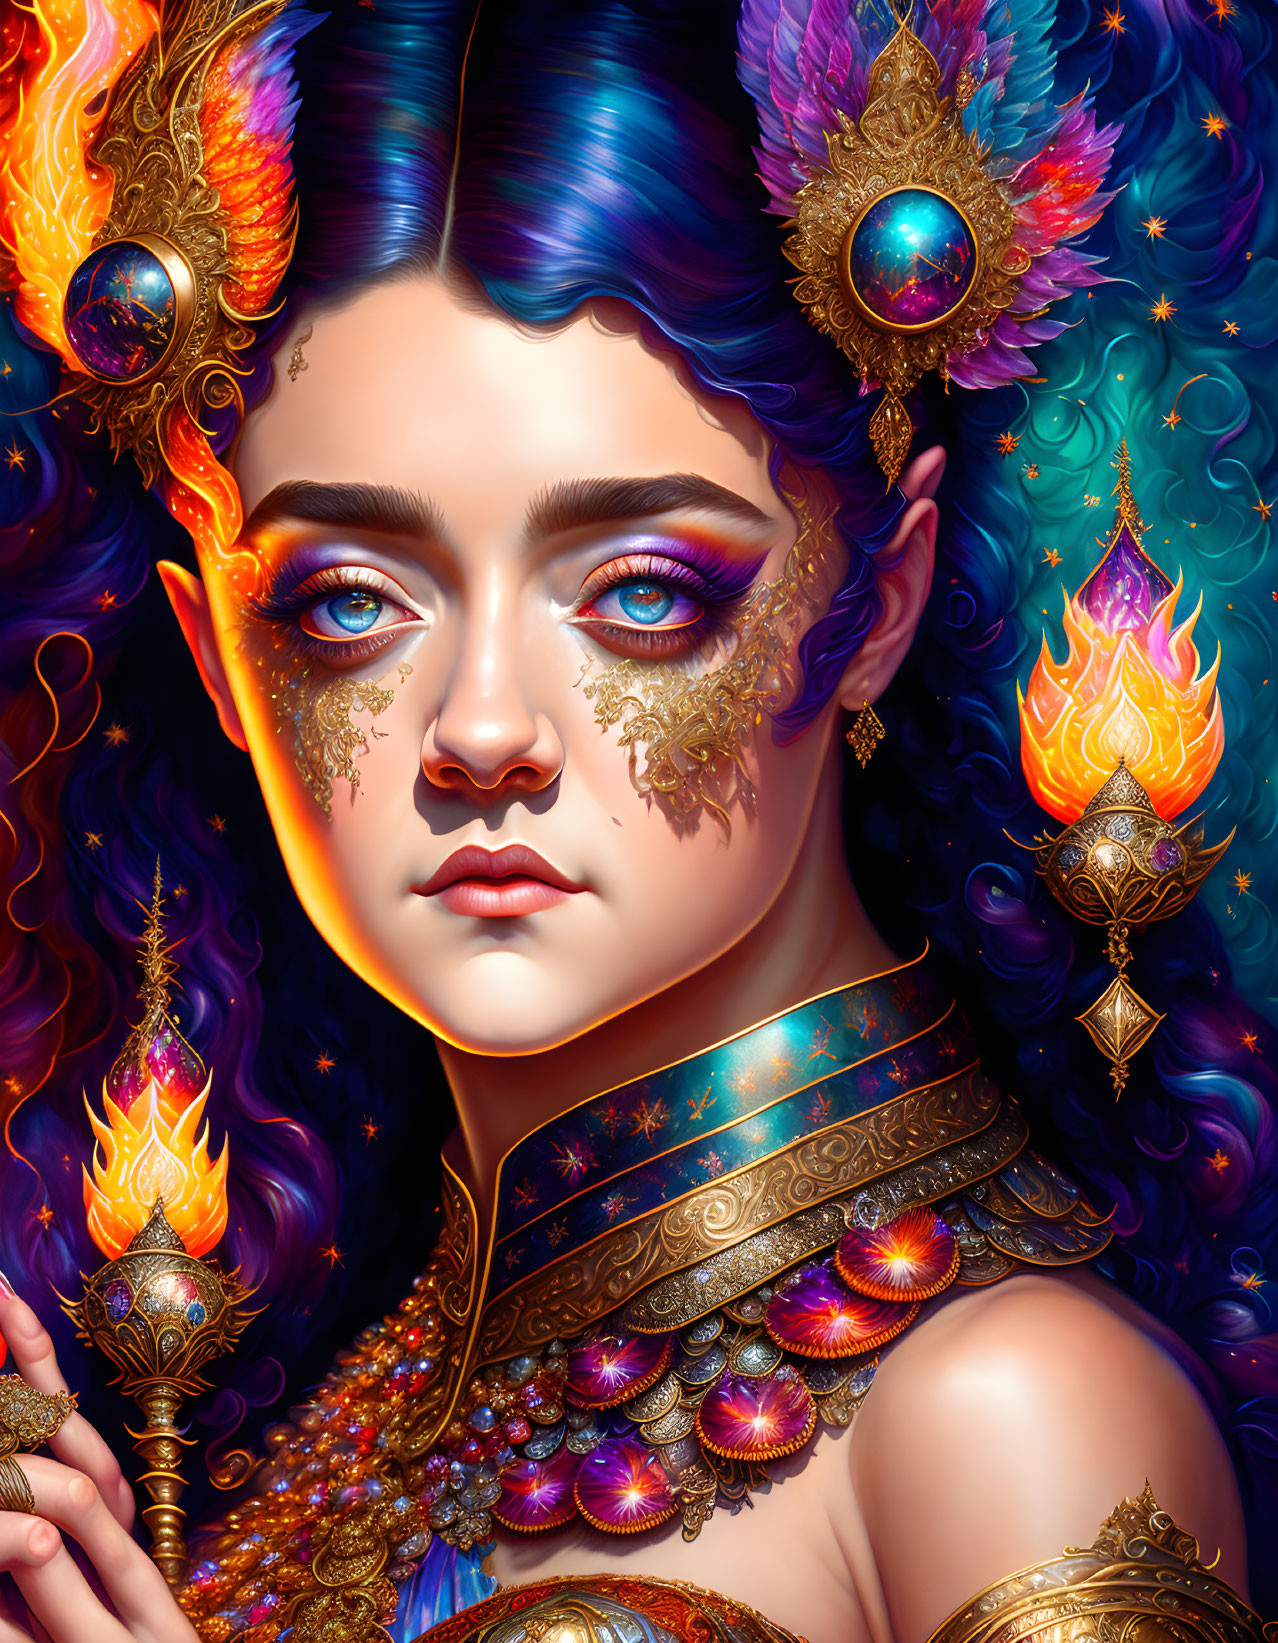 Fantasy portrait: Woman with blue hair, gold adornments, surrounded by flames